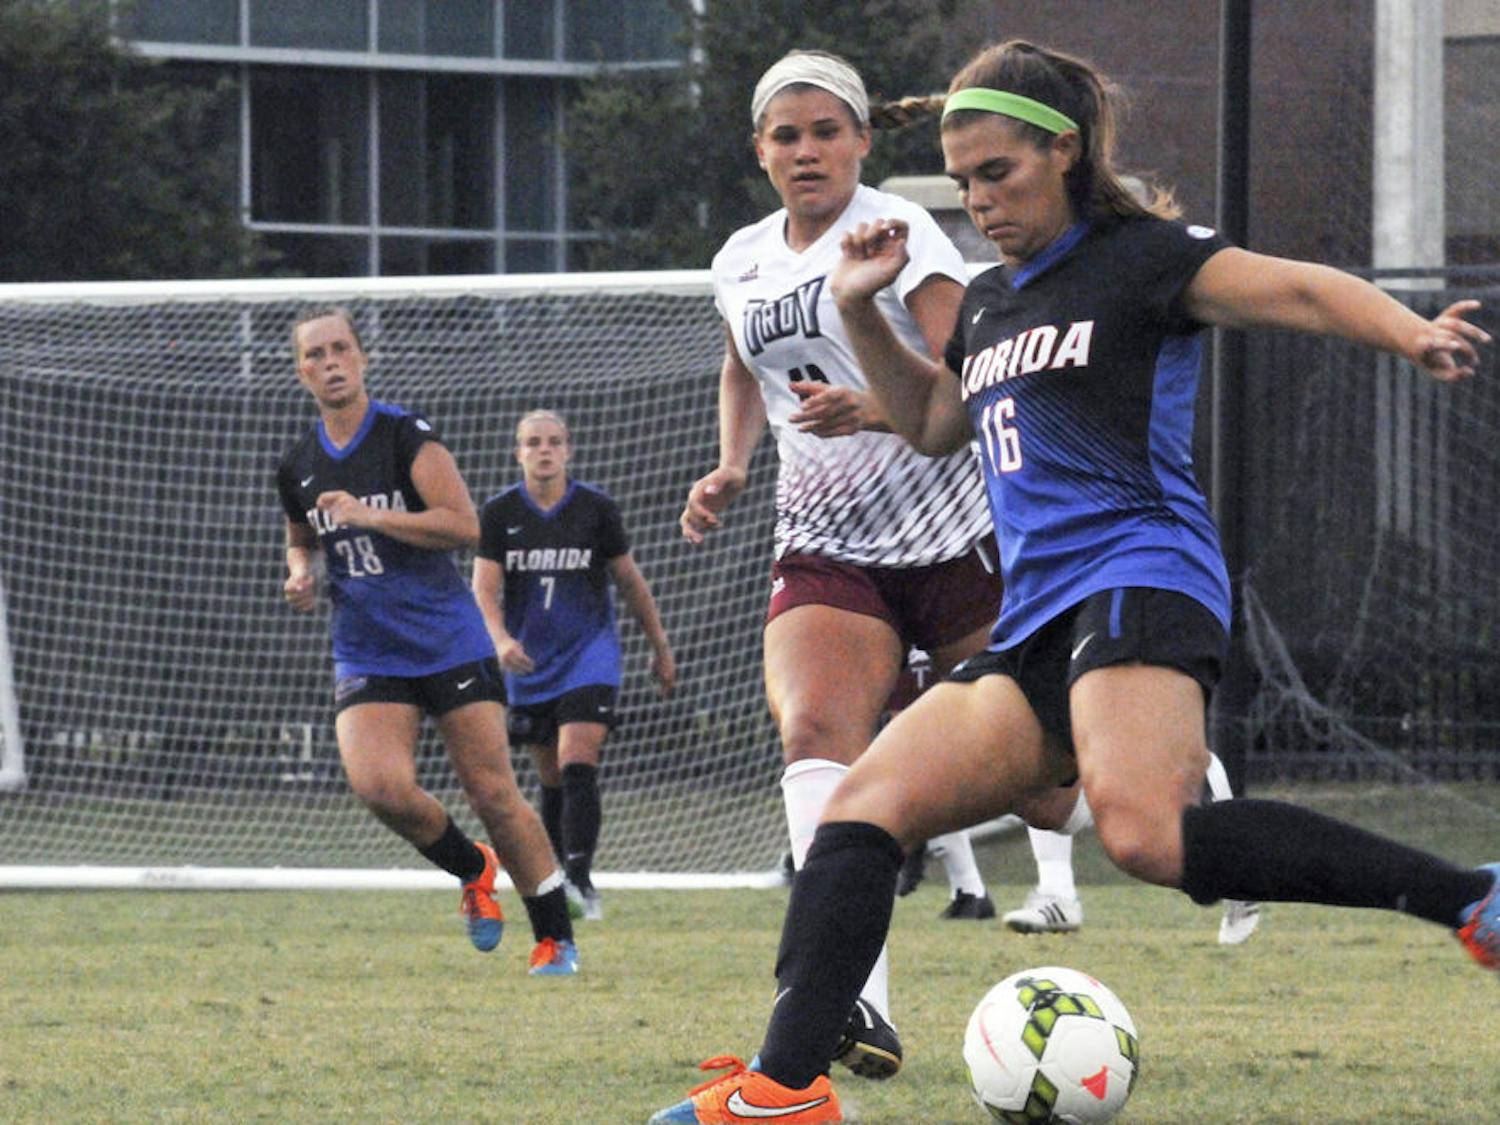 UF midfielder Liz Slattery dribbles during Florida's 2-1 win against Troy in an exhibition match on Aug. 11, 2015, at the soccer practice field at Donald R. Dizney Stadium.